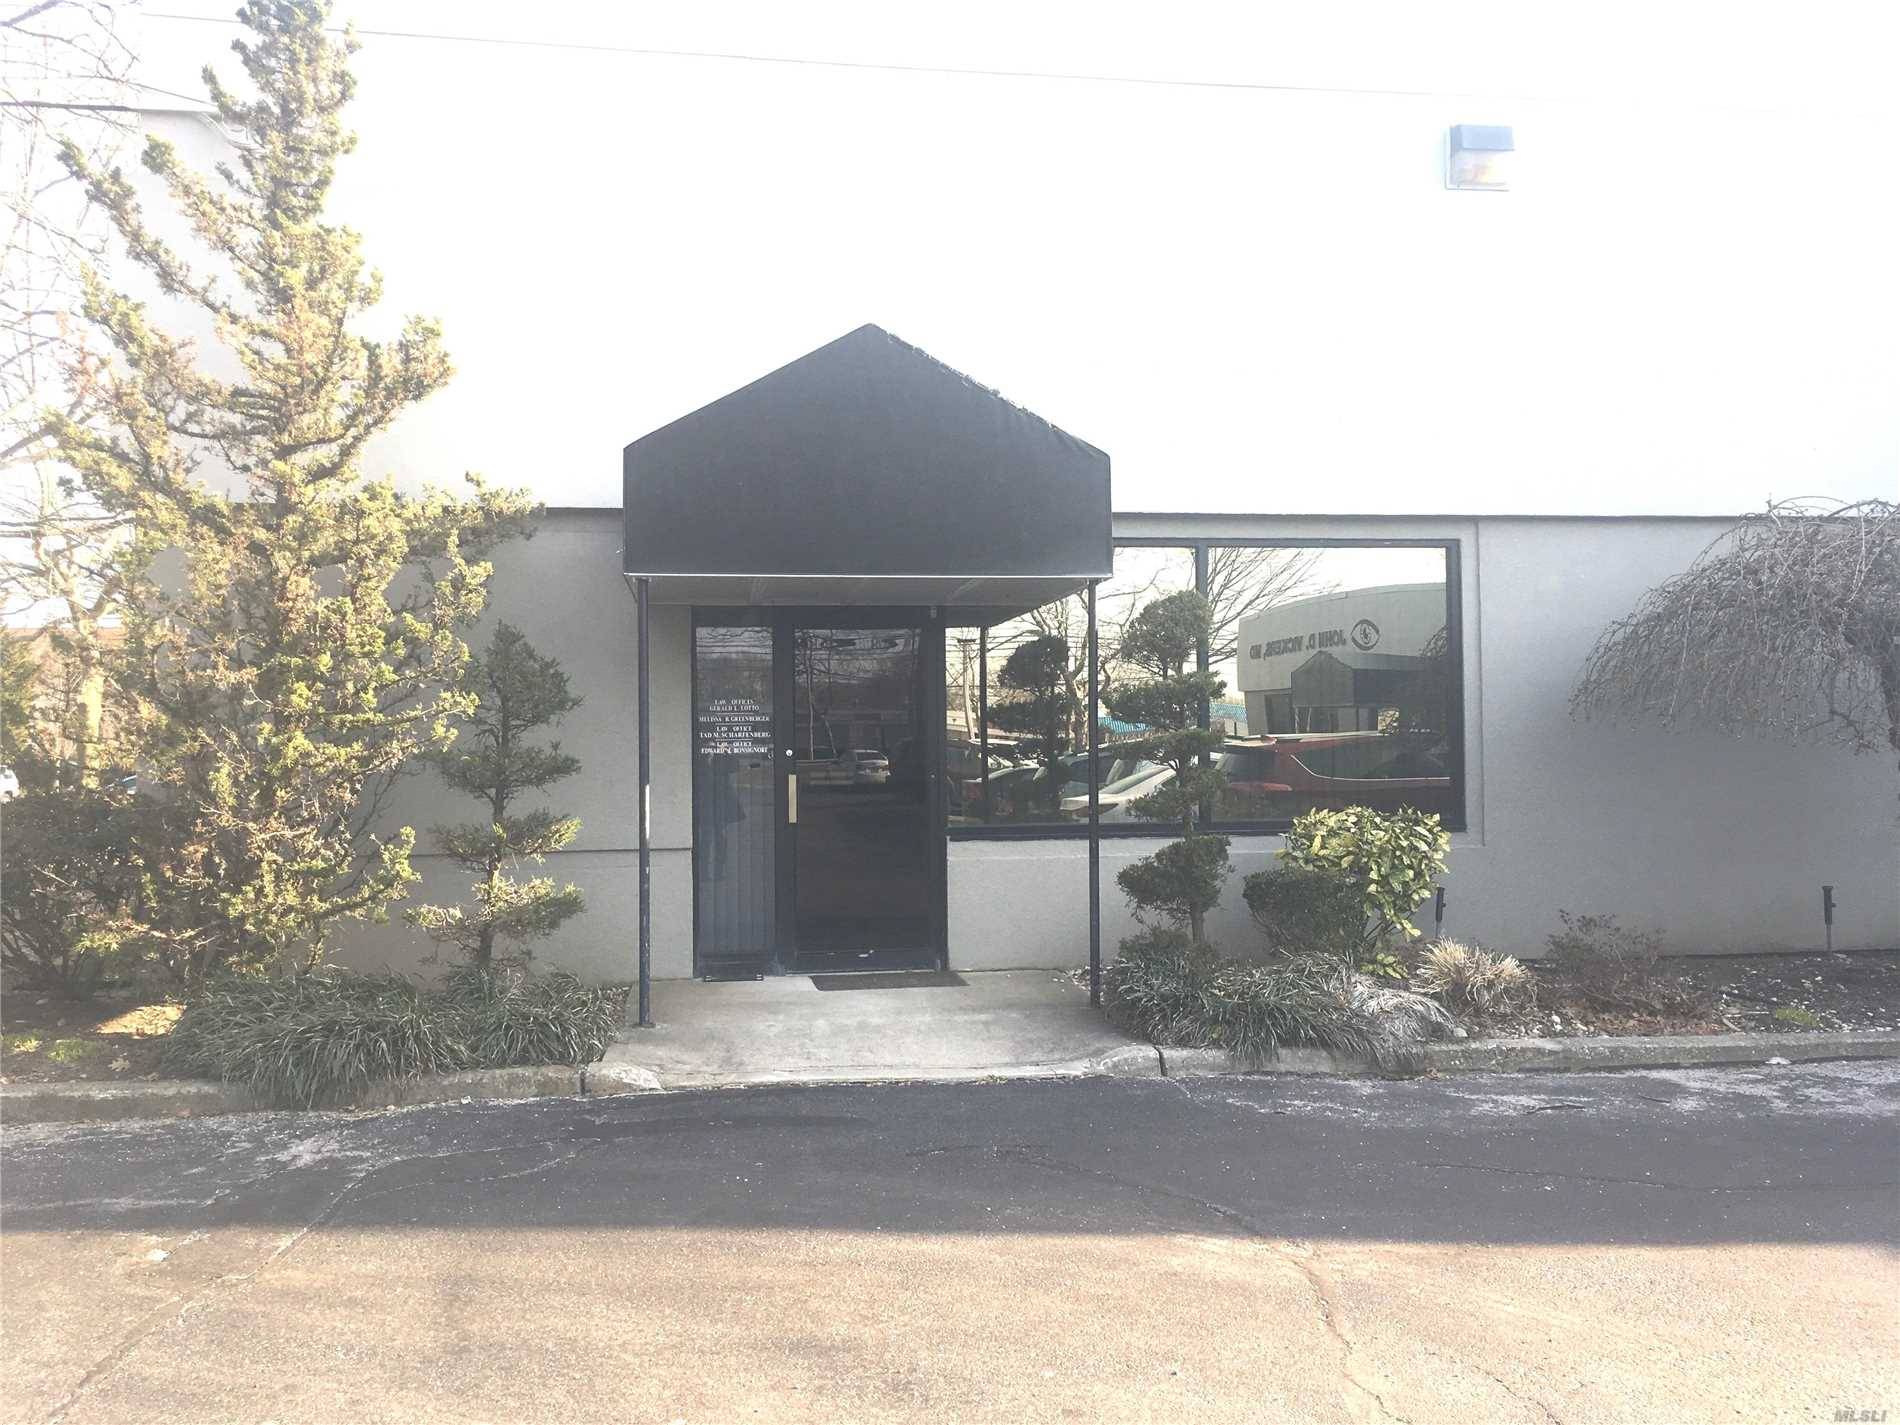 Unit 1935 Sqft In An Office Building, Unit Can Be Divided, Parking Lot 1st Floor.